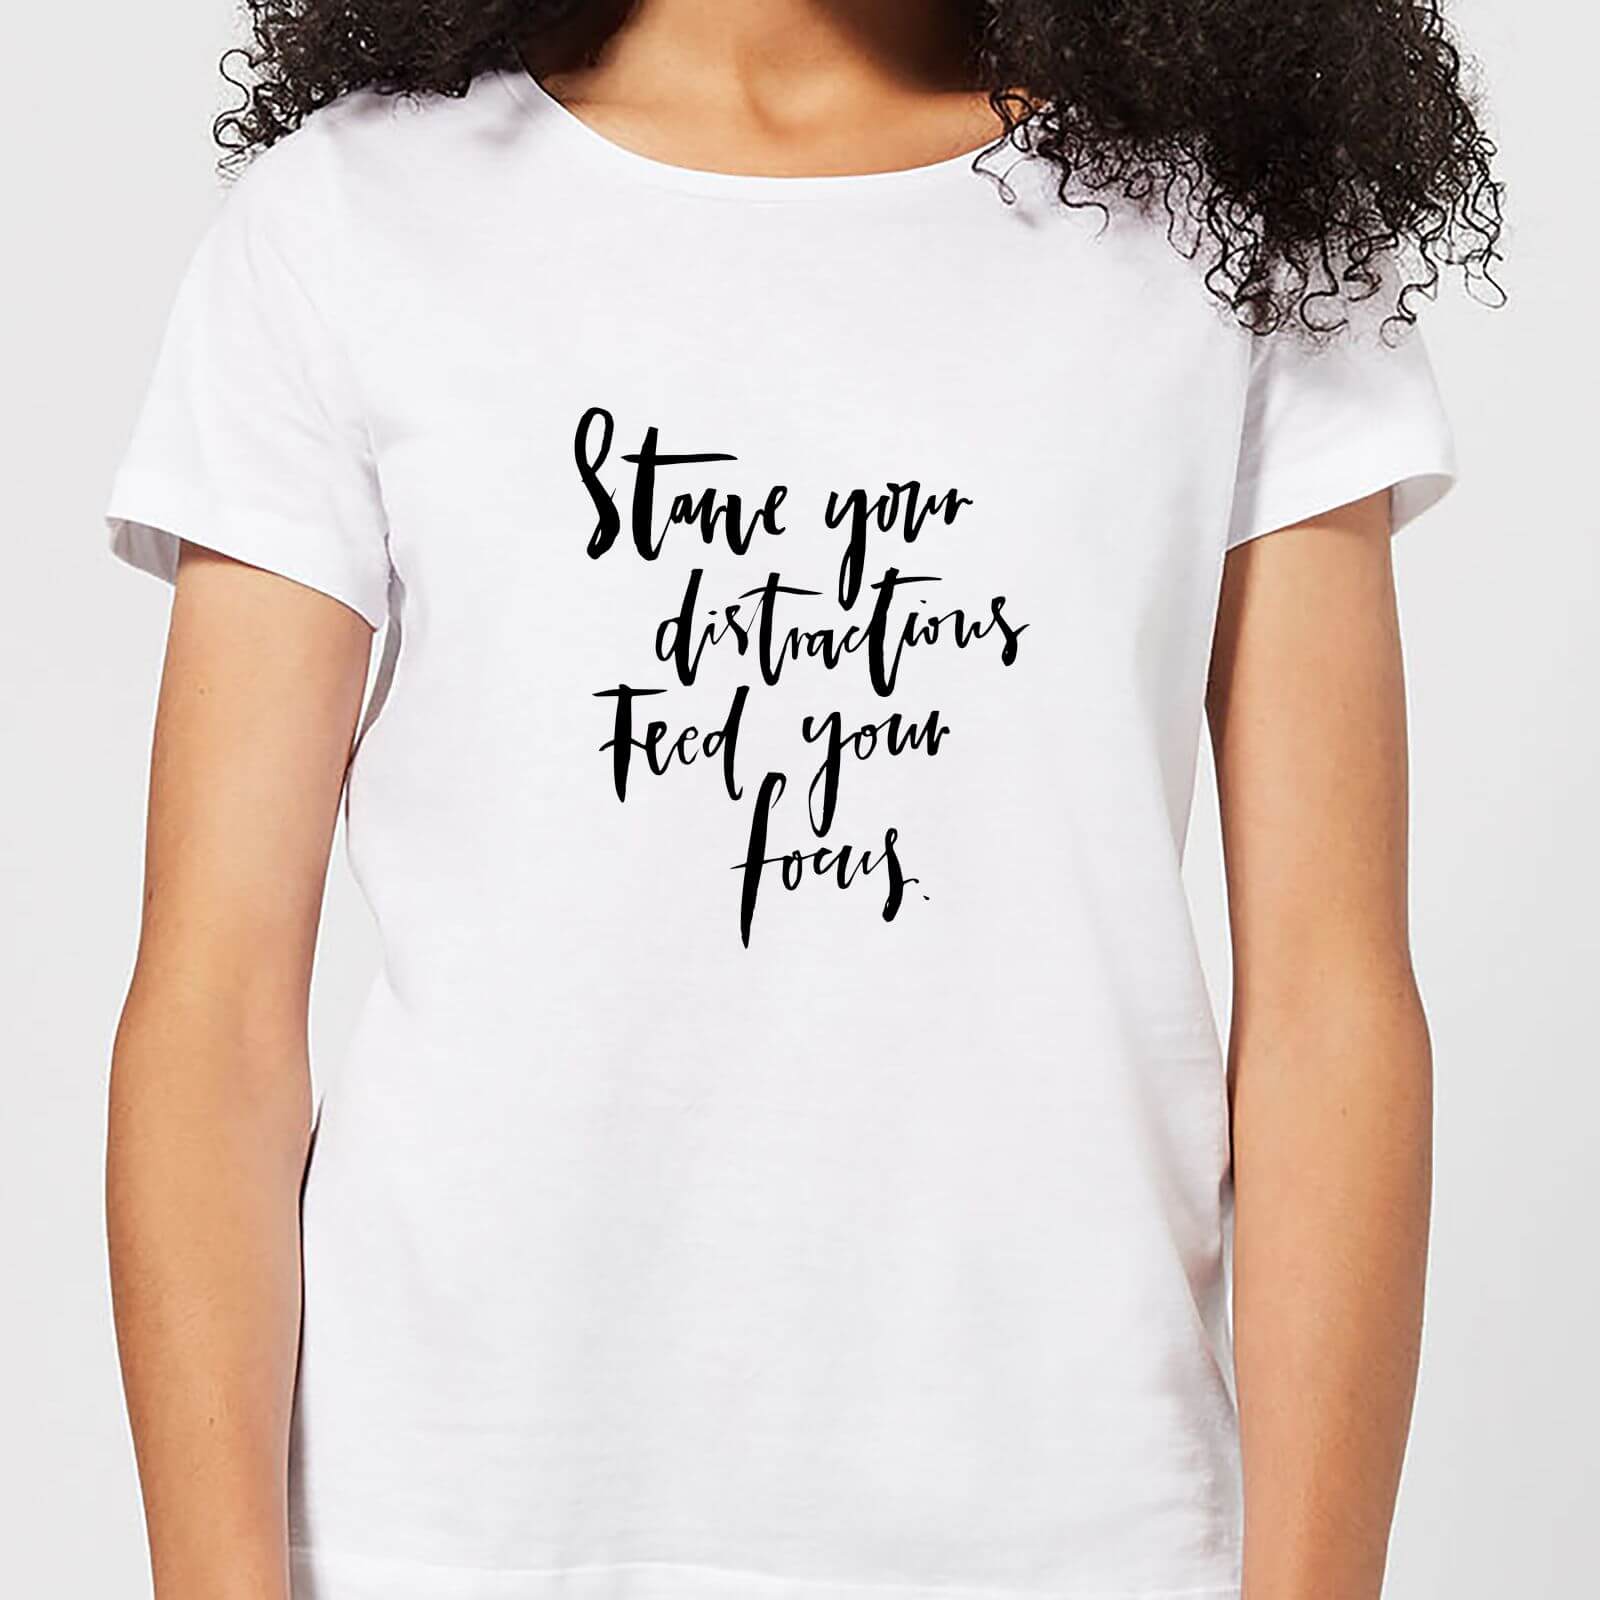 Starve Your Distractions Women's T-Shirt - White - S - White